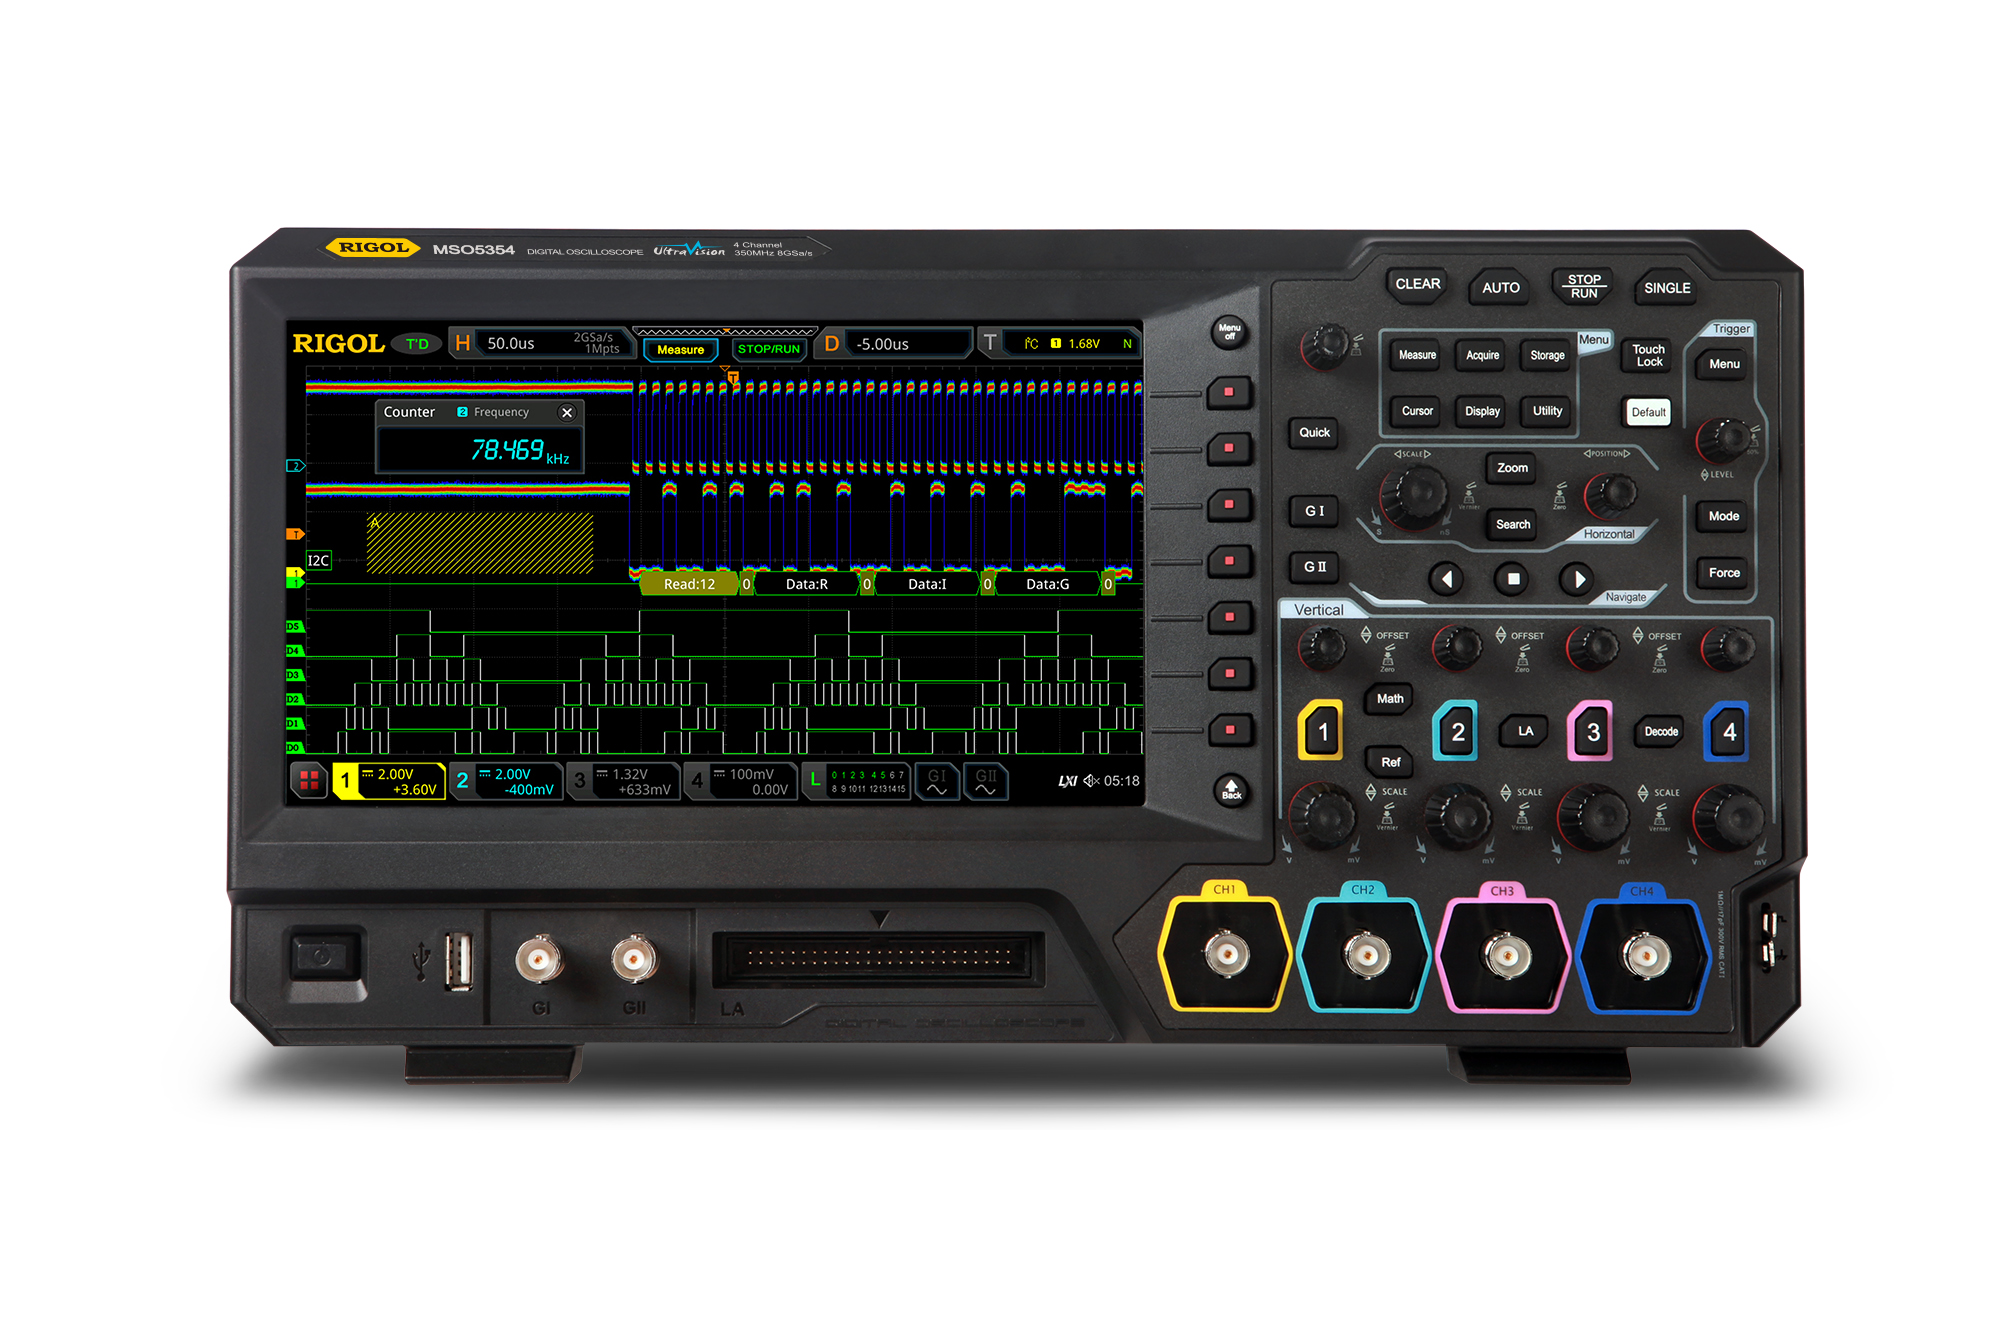 RIGOL Technologies expands its UltraVision II family of digital oscilloscopes with the MSO5000 Series scope